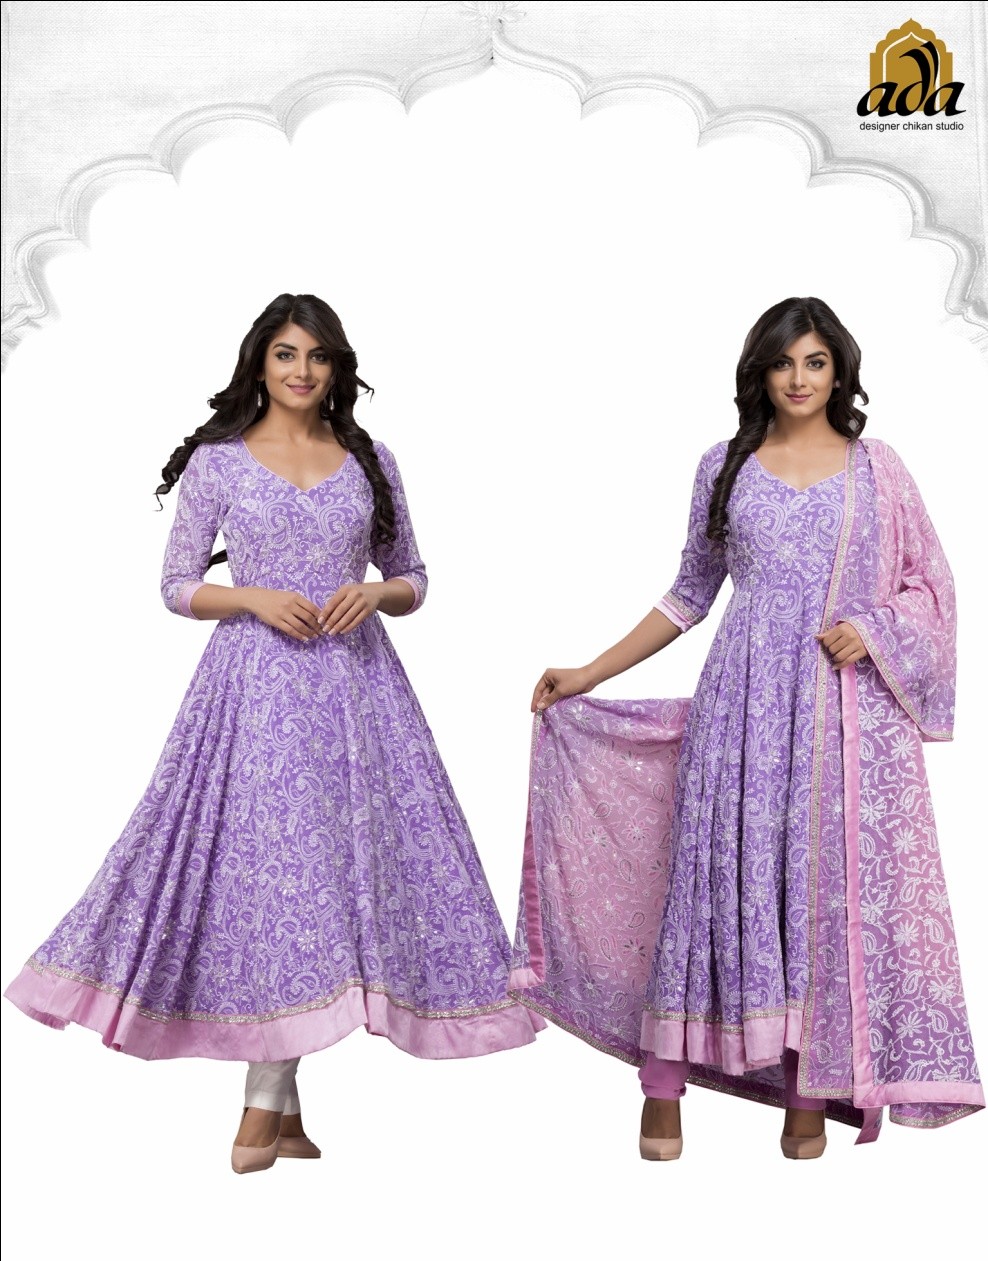 Add a Royal Touch to your looks with exquisite Chikan Anarkali Sets!